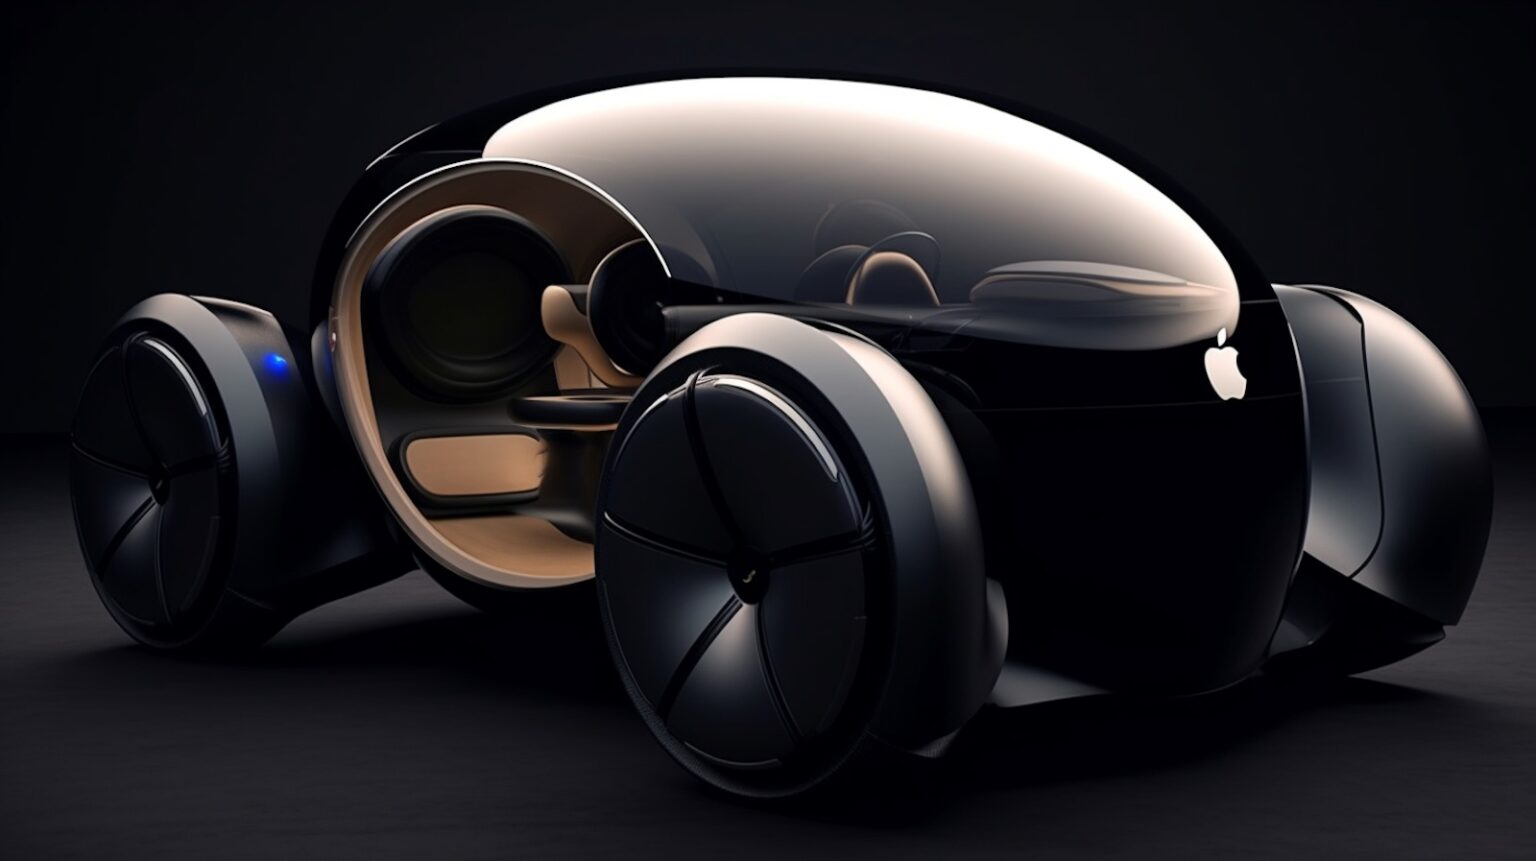 Until the Apple Car is officially announced, all we have are concepts like this one.